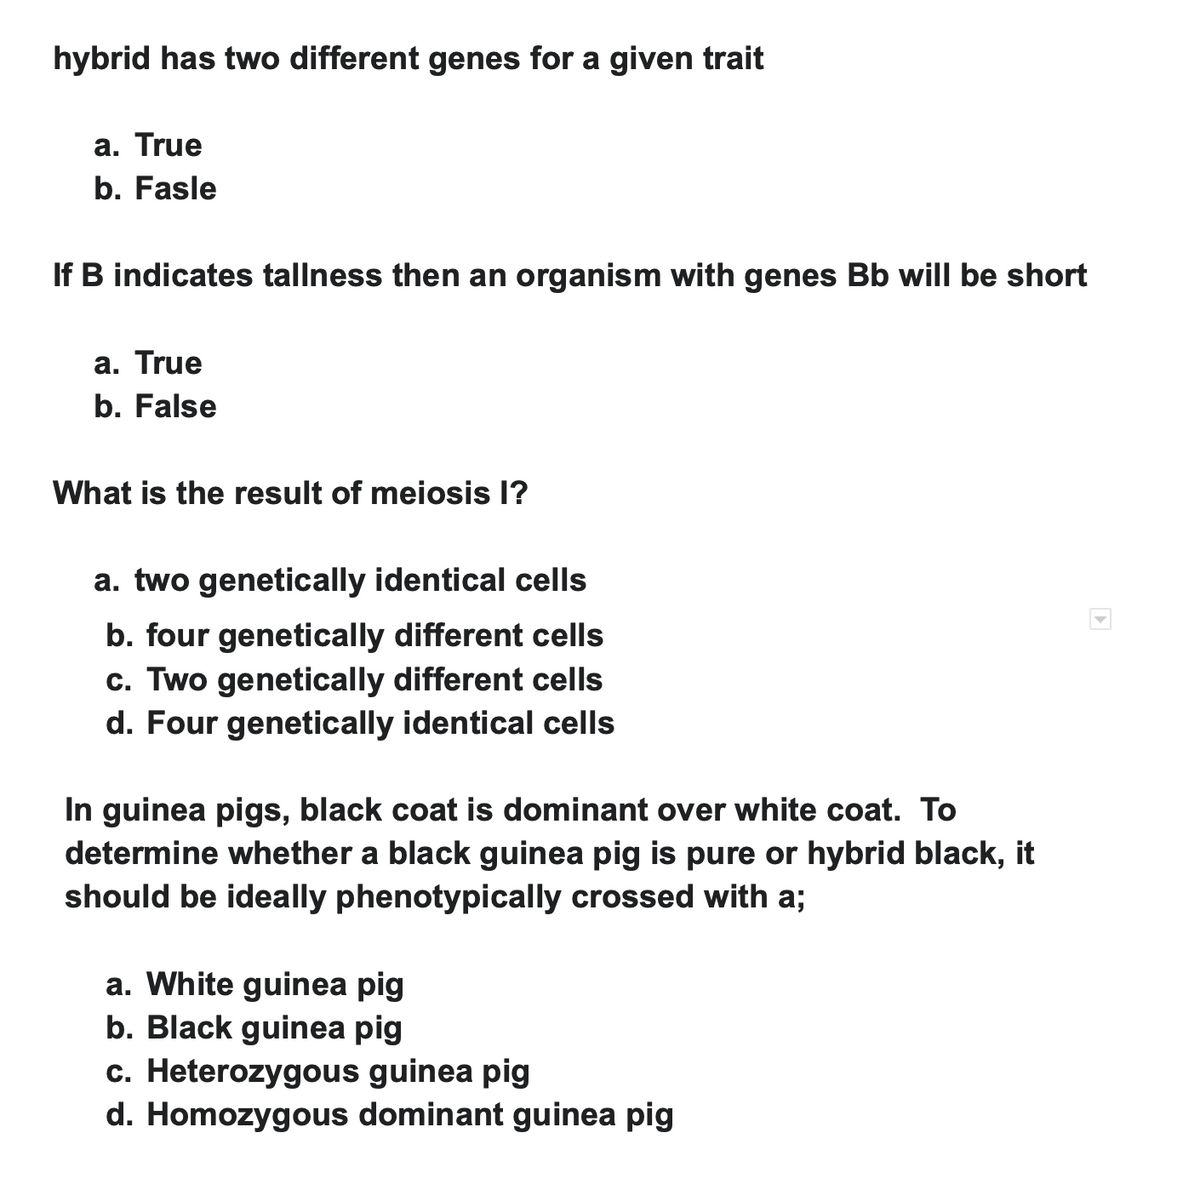 hybrid has two different genes for a given trait
a. True
b. Fasle
If B indicates tallness then an organism with genes Bb will be short
a. True
b. False
What is the result of meiosis l?
a. two genetically identical cells
b. four genetically different cells
c. Two genetically different cells
d. Four genetically identical cells
In guinea pigs, black coat is dominant over white coat. To
determine whether a black guinea pig is pure or hybrid black, it
should be ideally phenotypically crossed with a;
a. White guinea pig
b. Black guinea pig
c. Heterozygous guinea pig
d. Homozygous dominant guinea pig